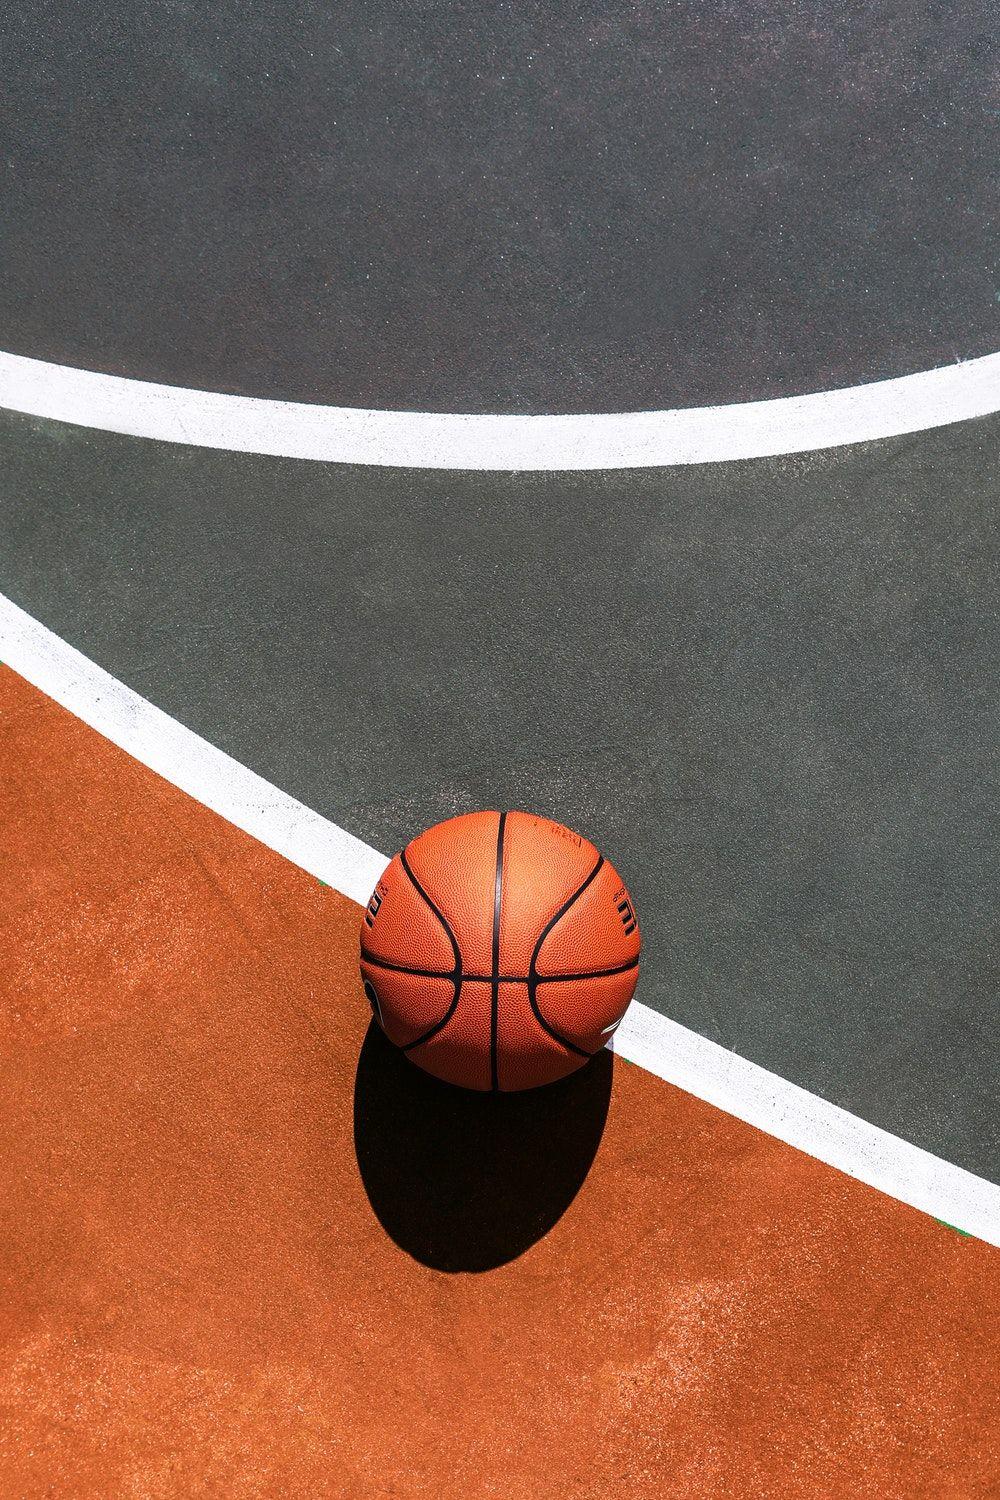 Basketball Picture. Download Free Image